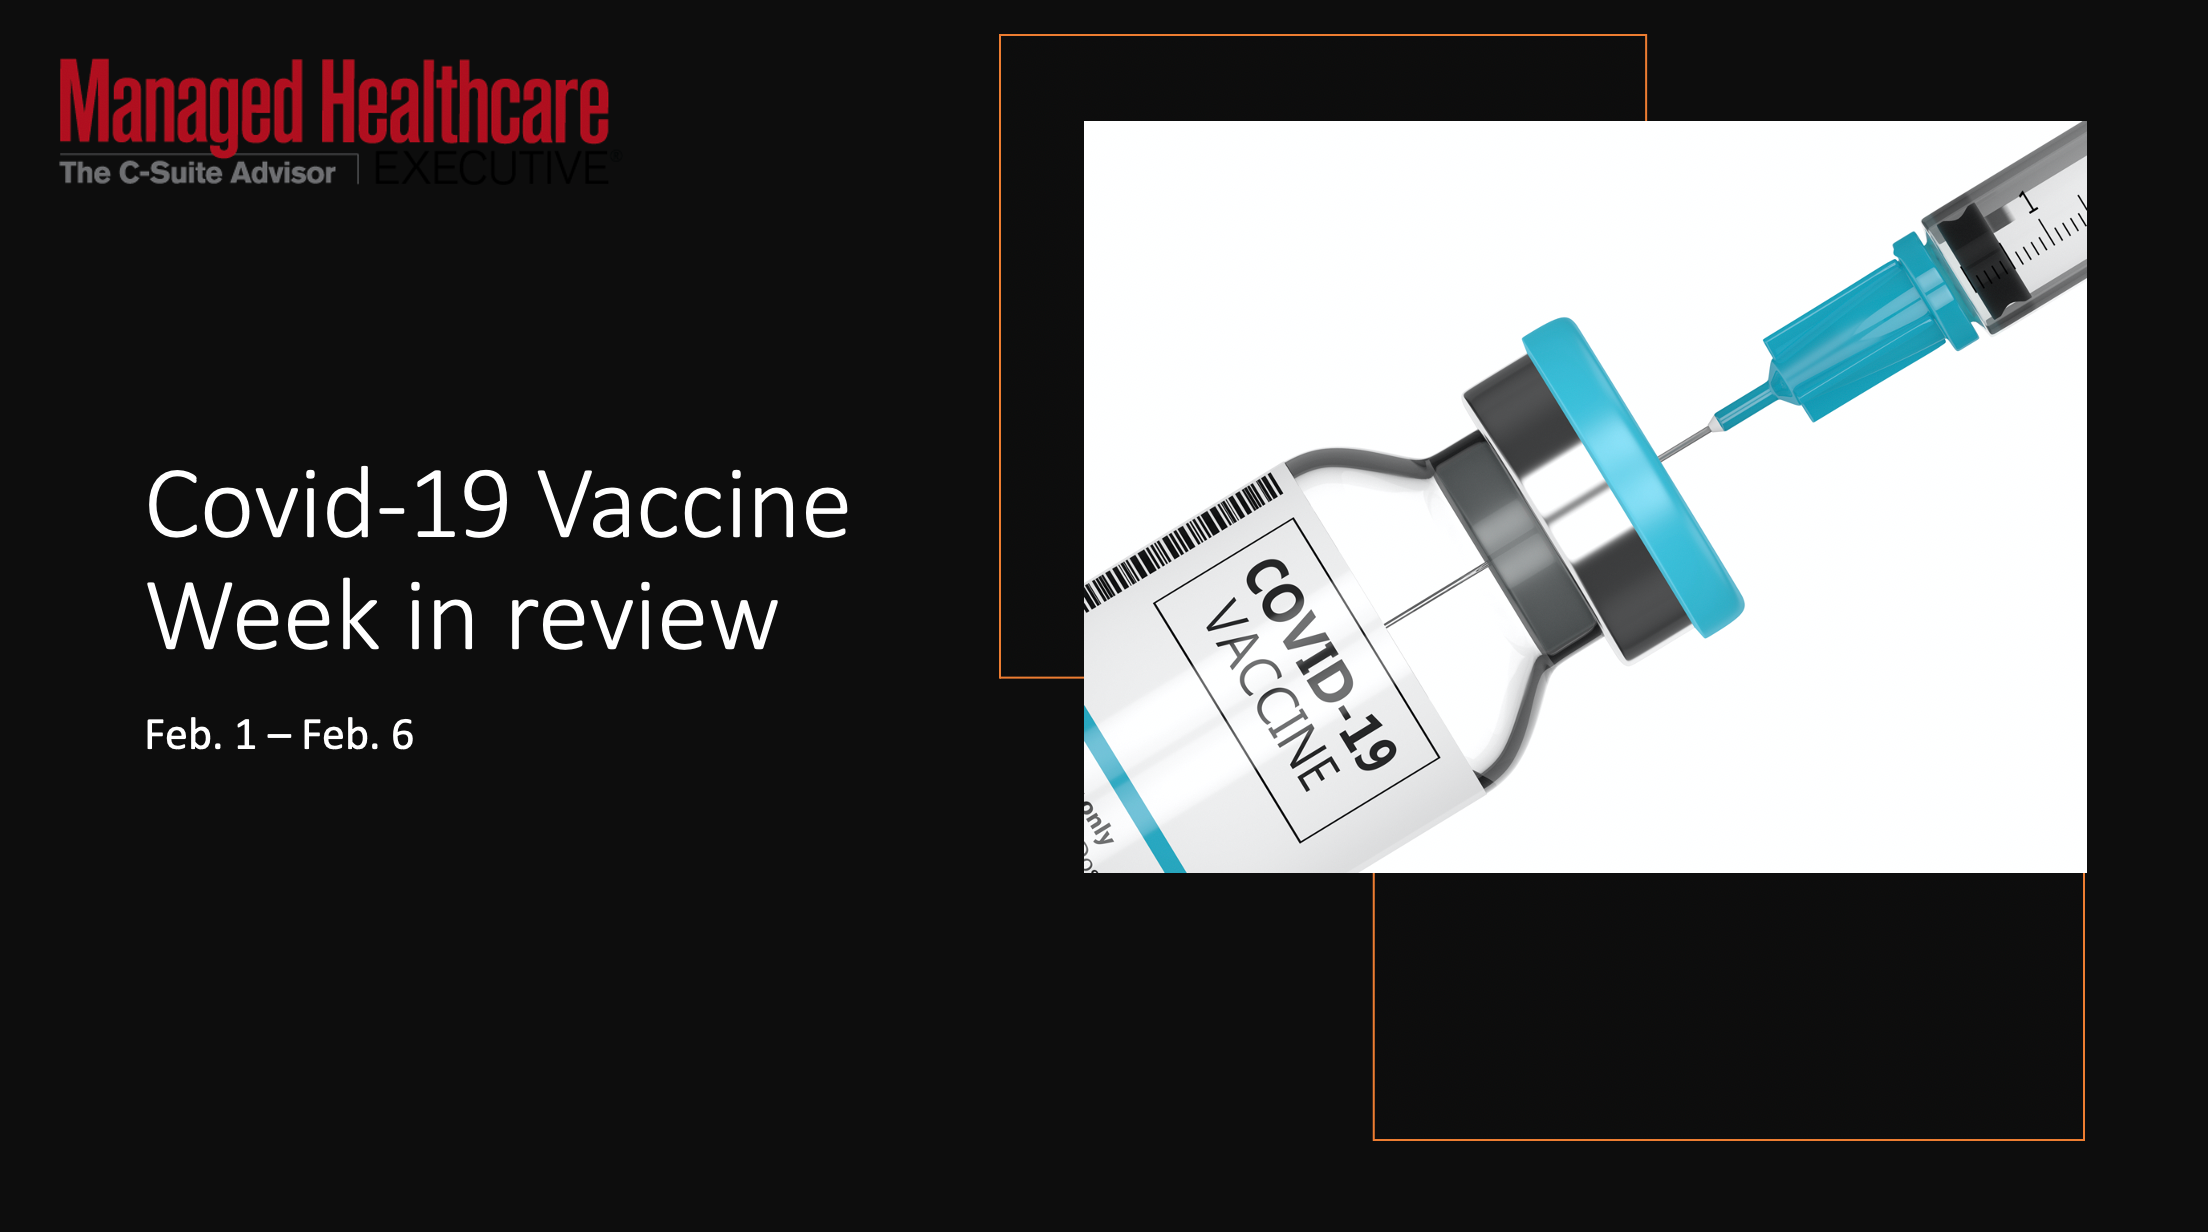 J&J asks for EUA for its one-dose vaccine, Russian researchers report positive result for Sputnik V, COVID, Pentagon swings into action and other COVID-19 vaccine events